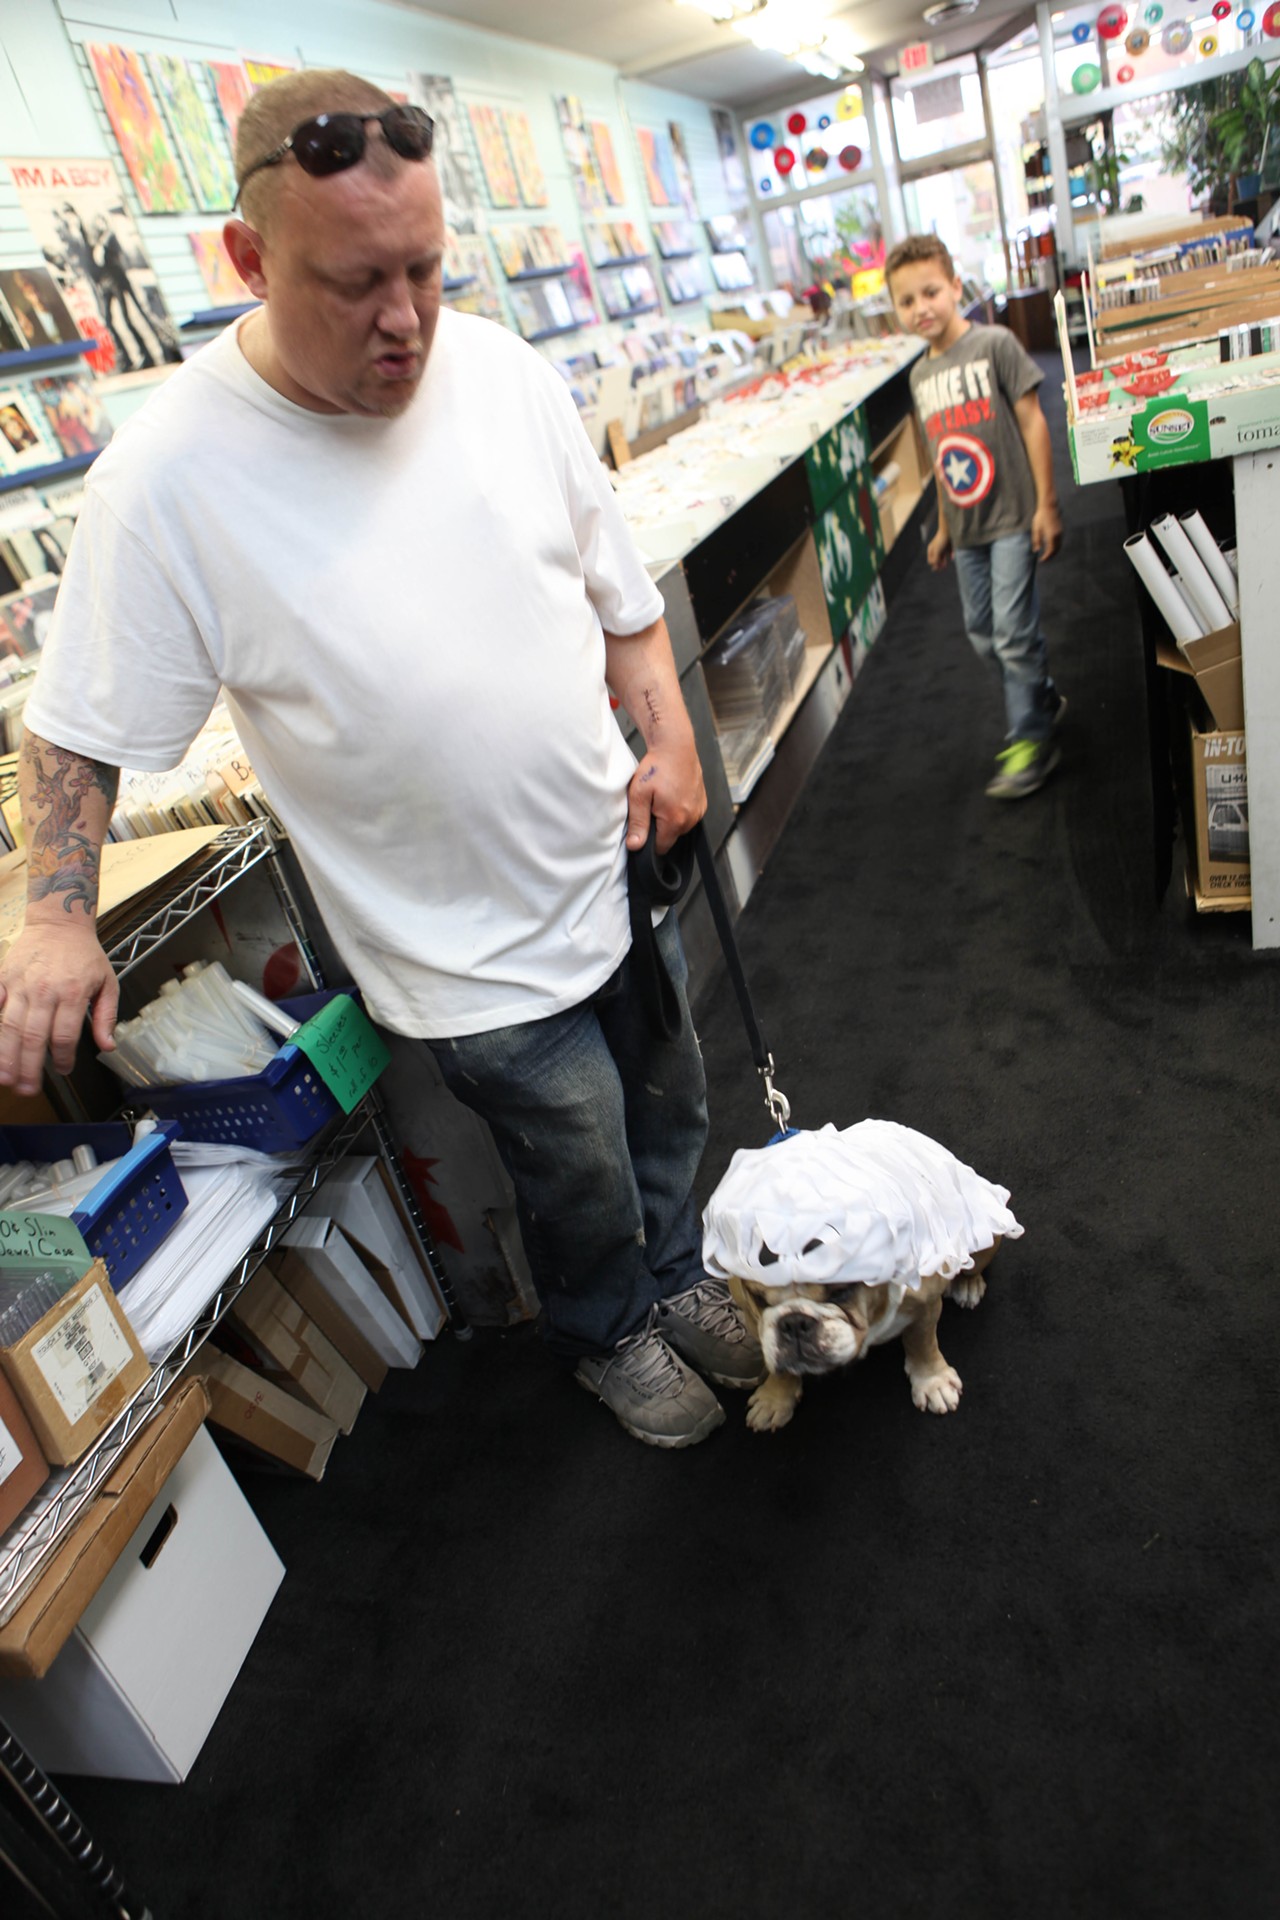 All the adorable dogs we saw at Stormy Records Halloween costume contest